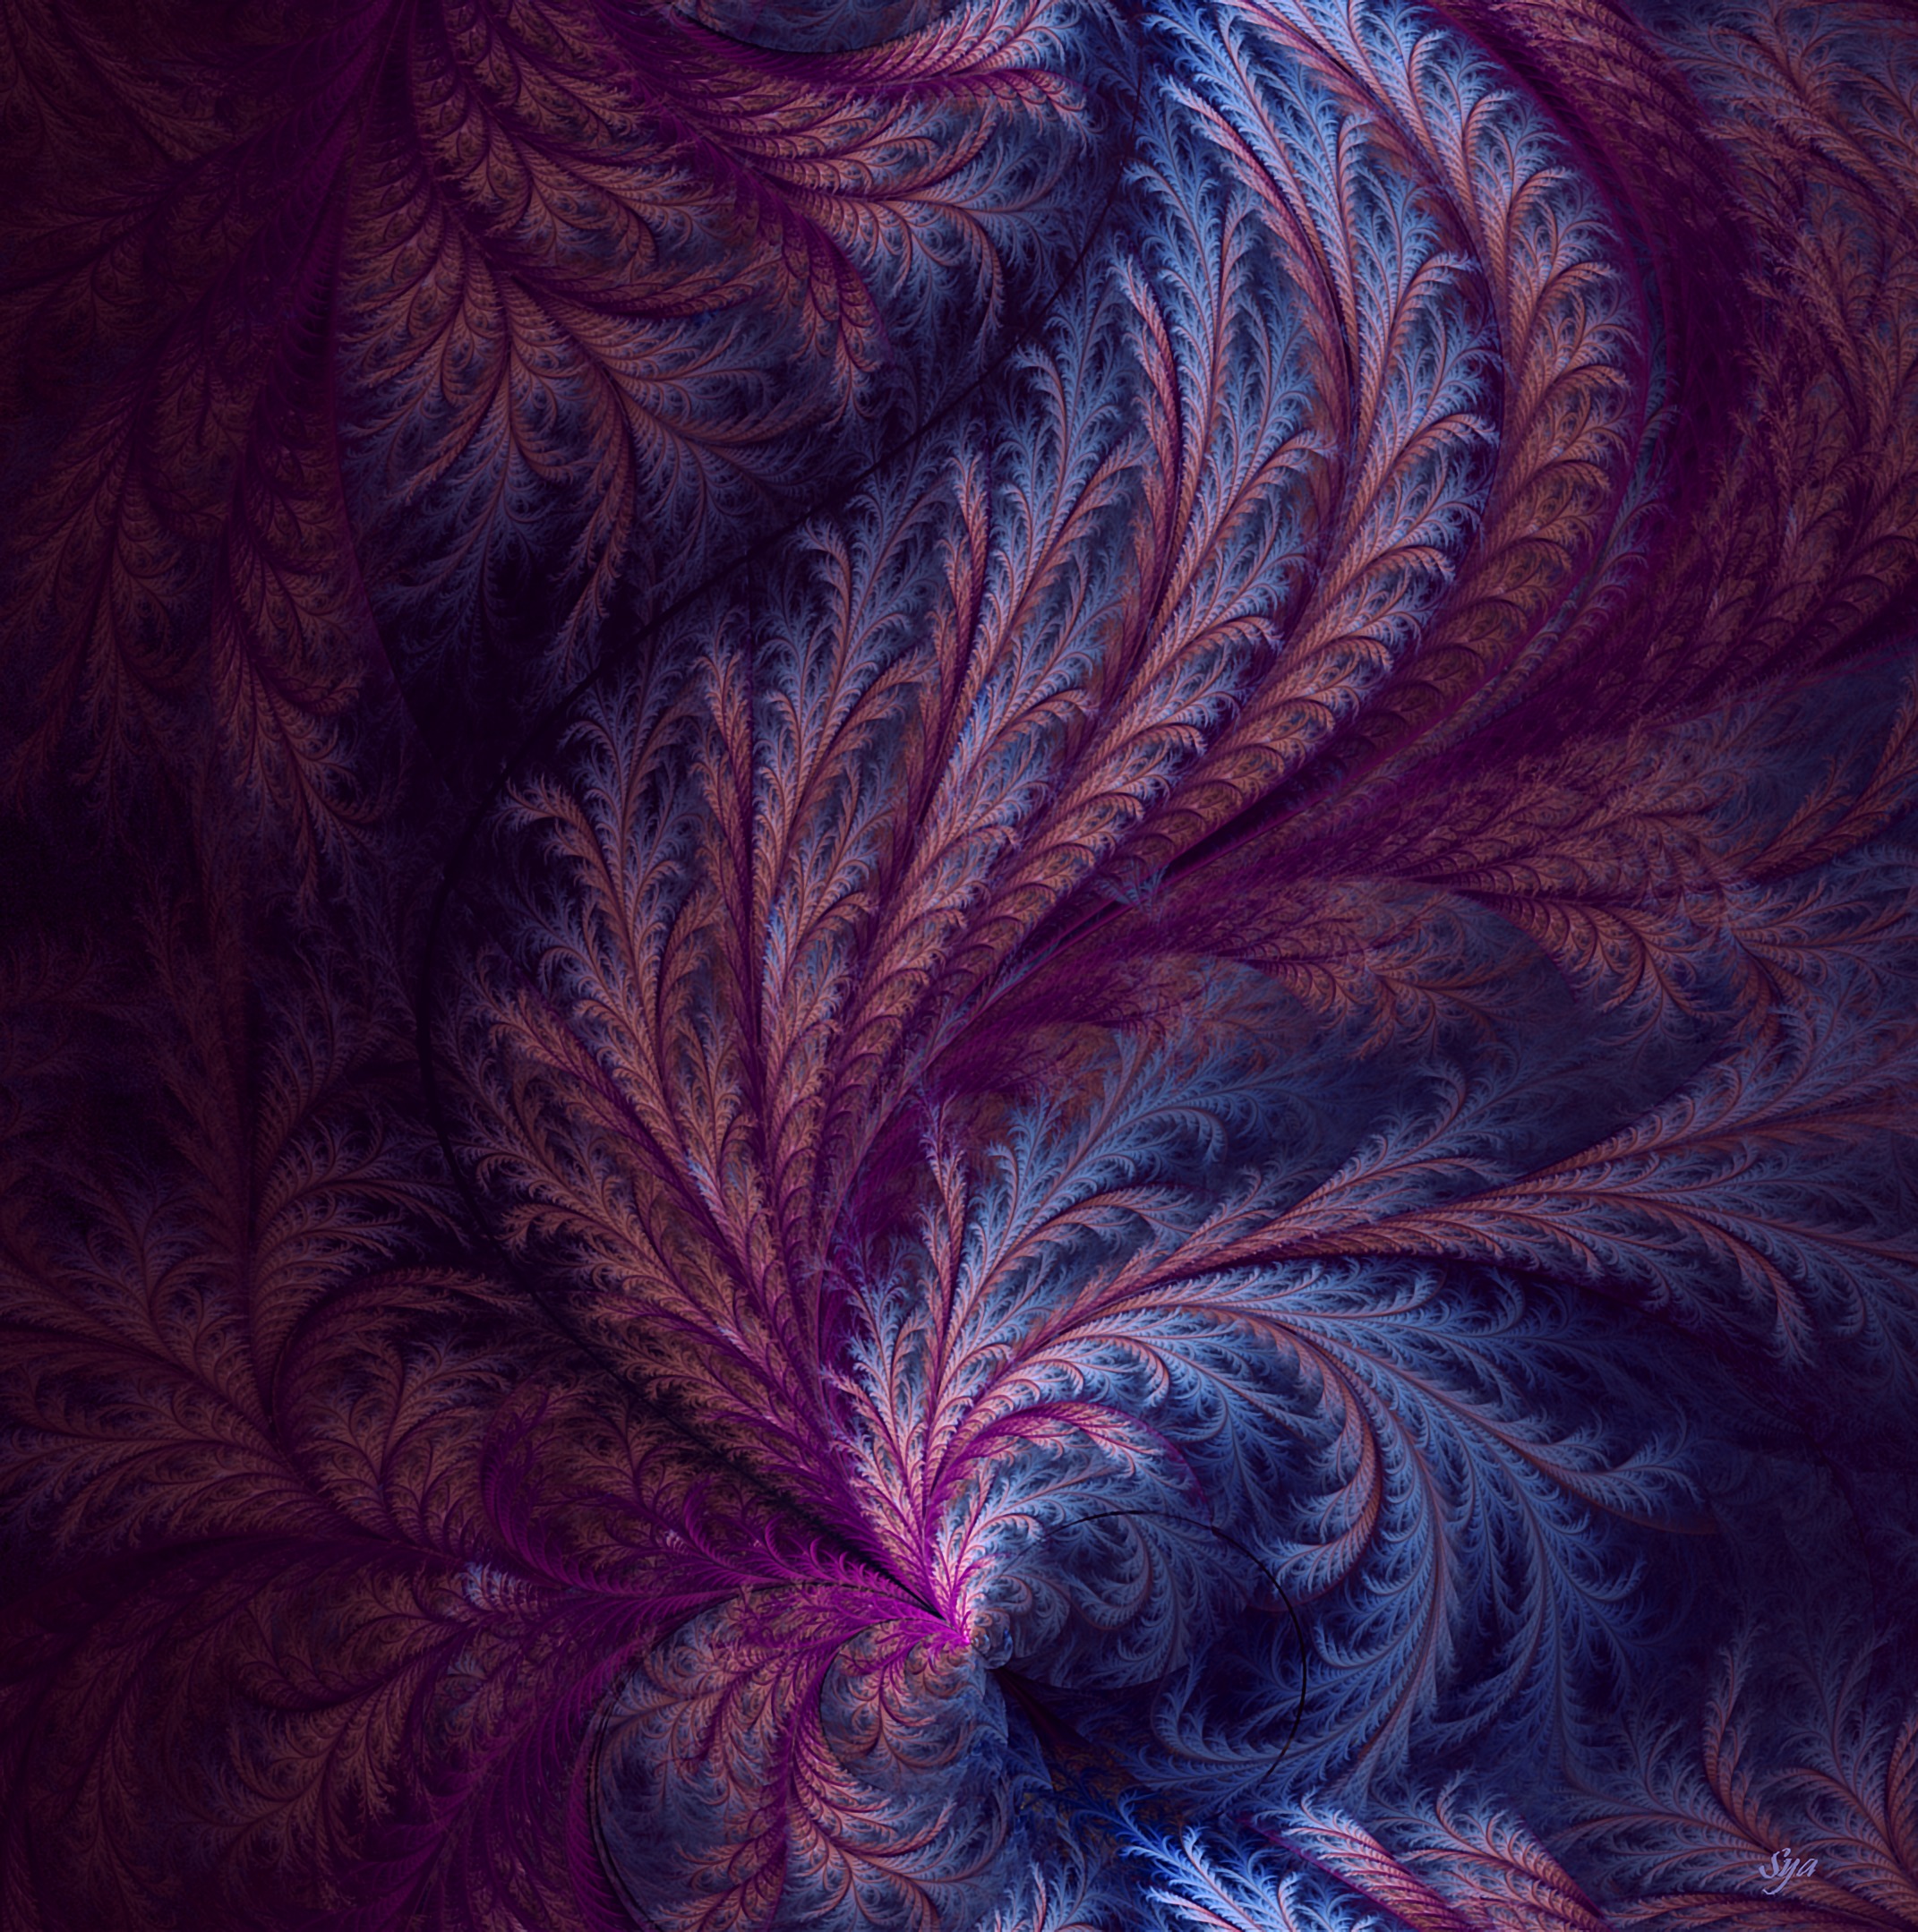 abstract, fractal, pattern, confused, intricate, branched, branchy